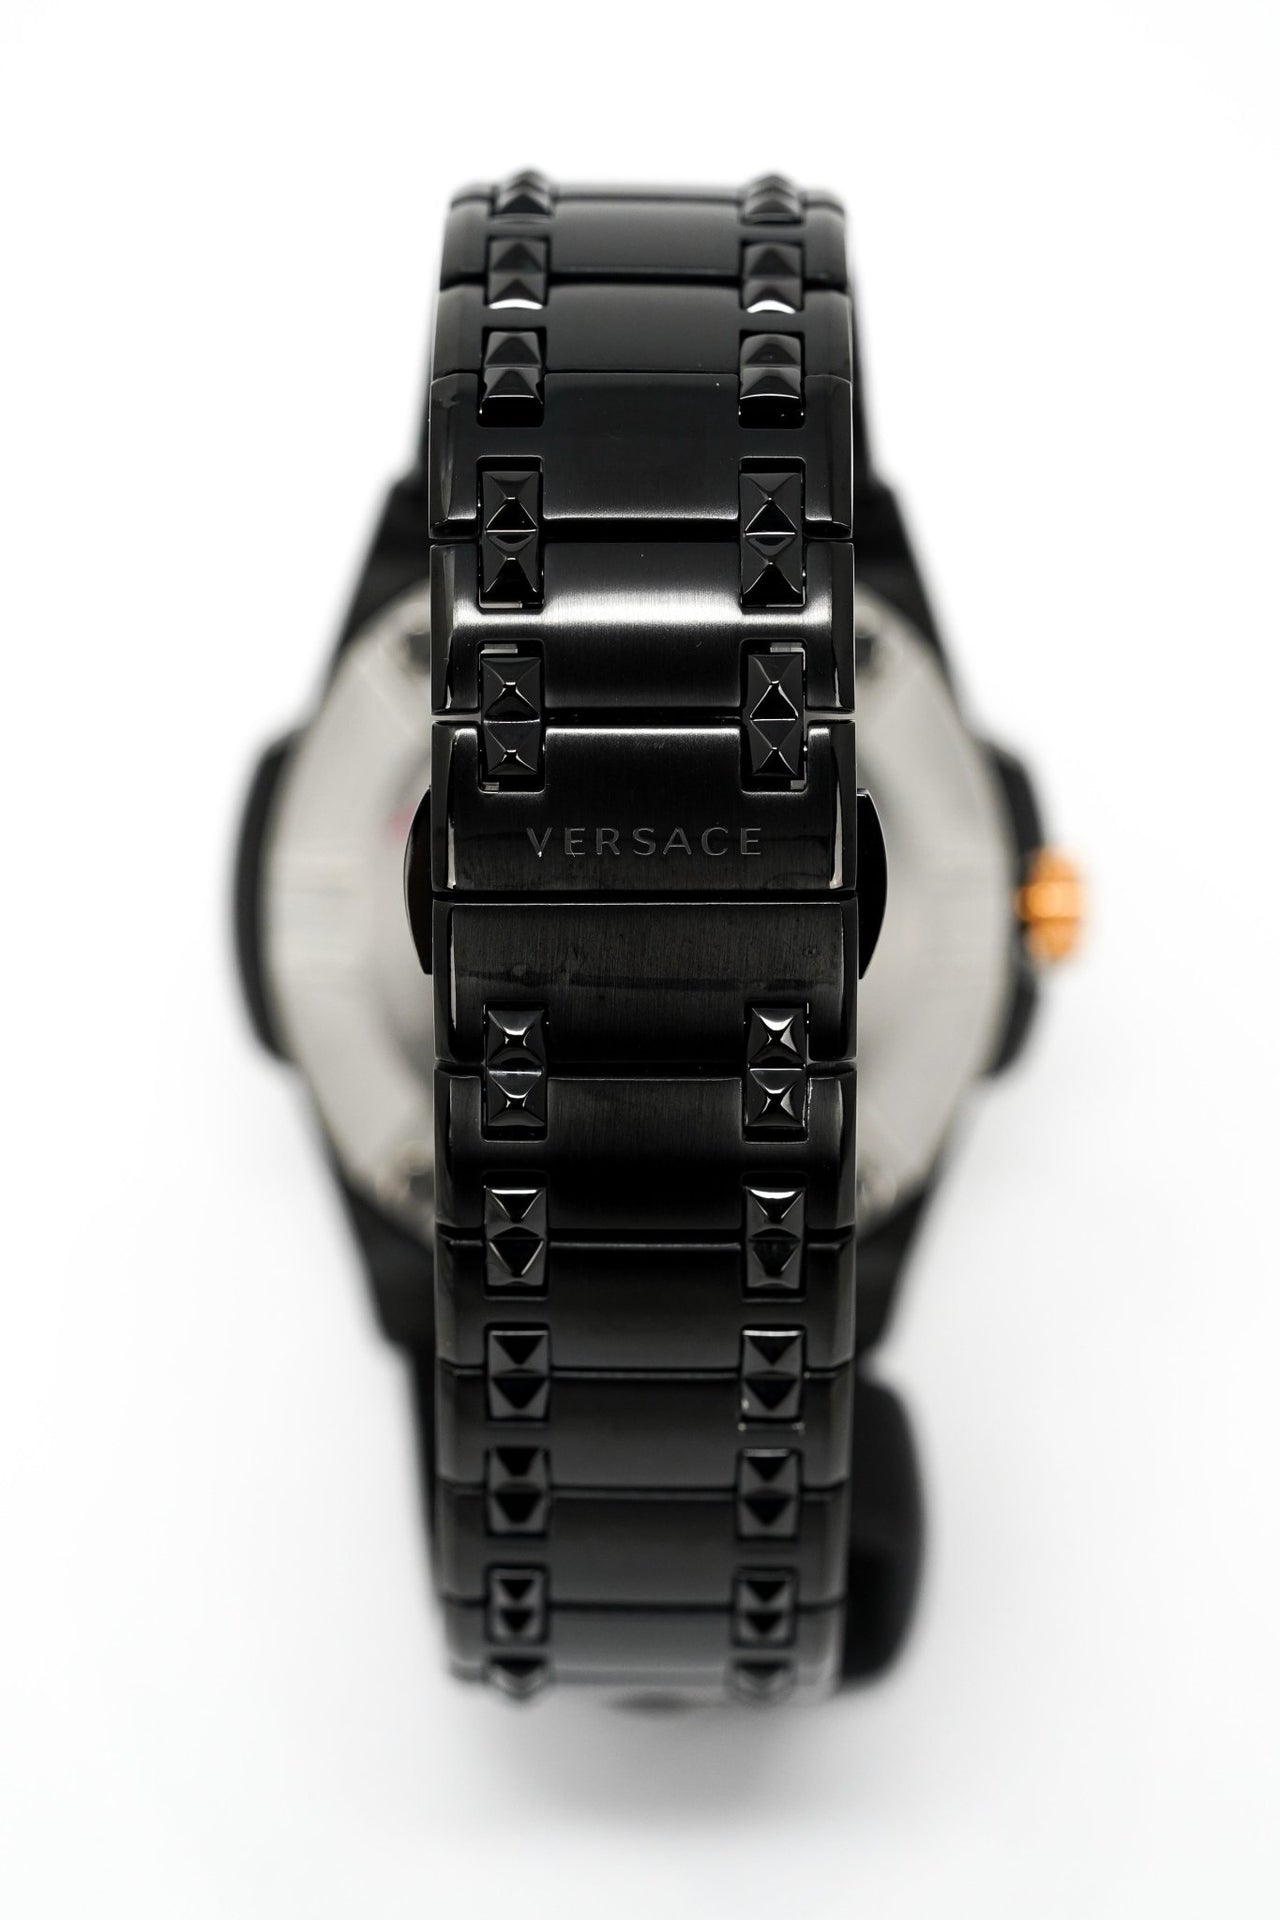 Versace Men's Watch Chain Reaction Black VEDY00719 - Watches & Crystals